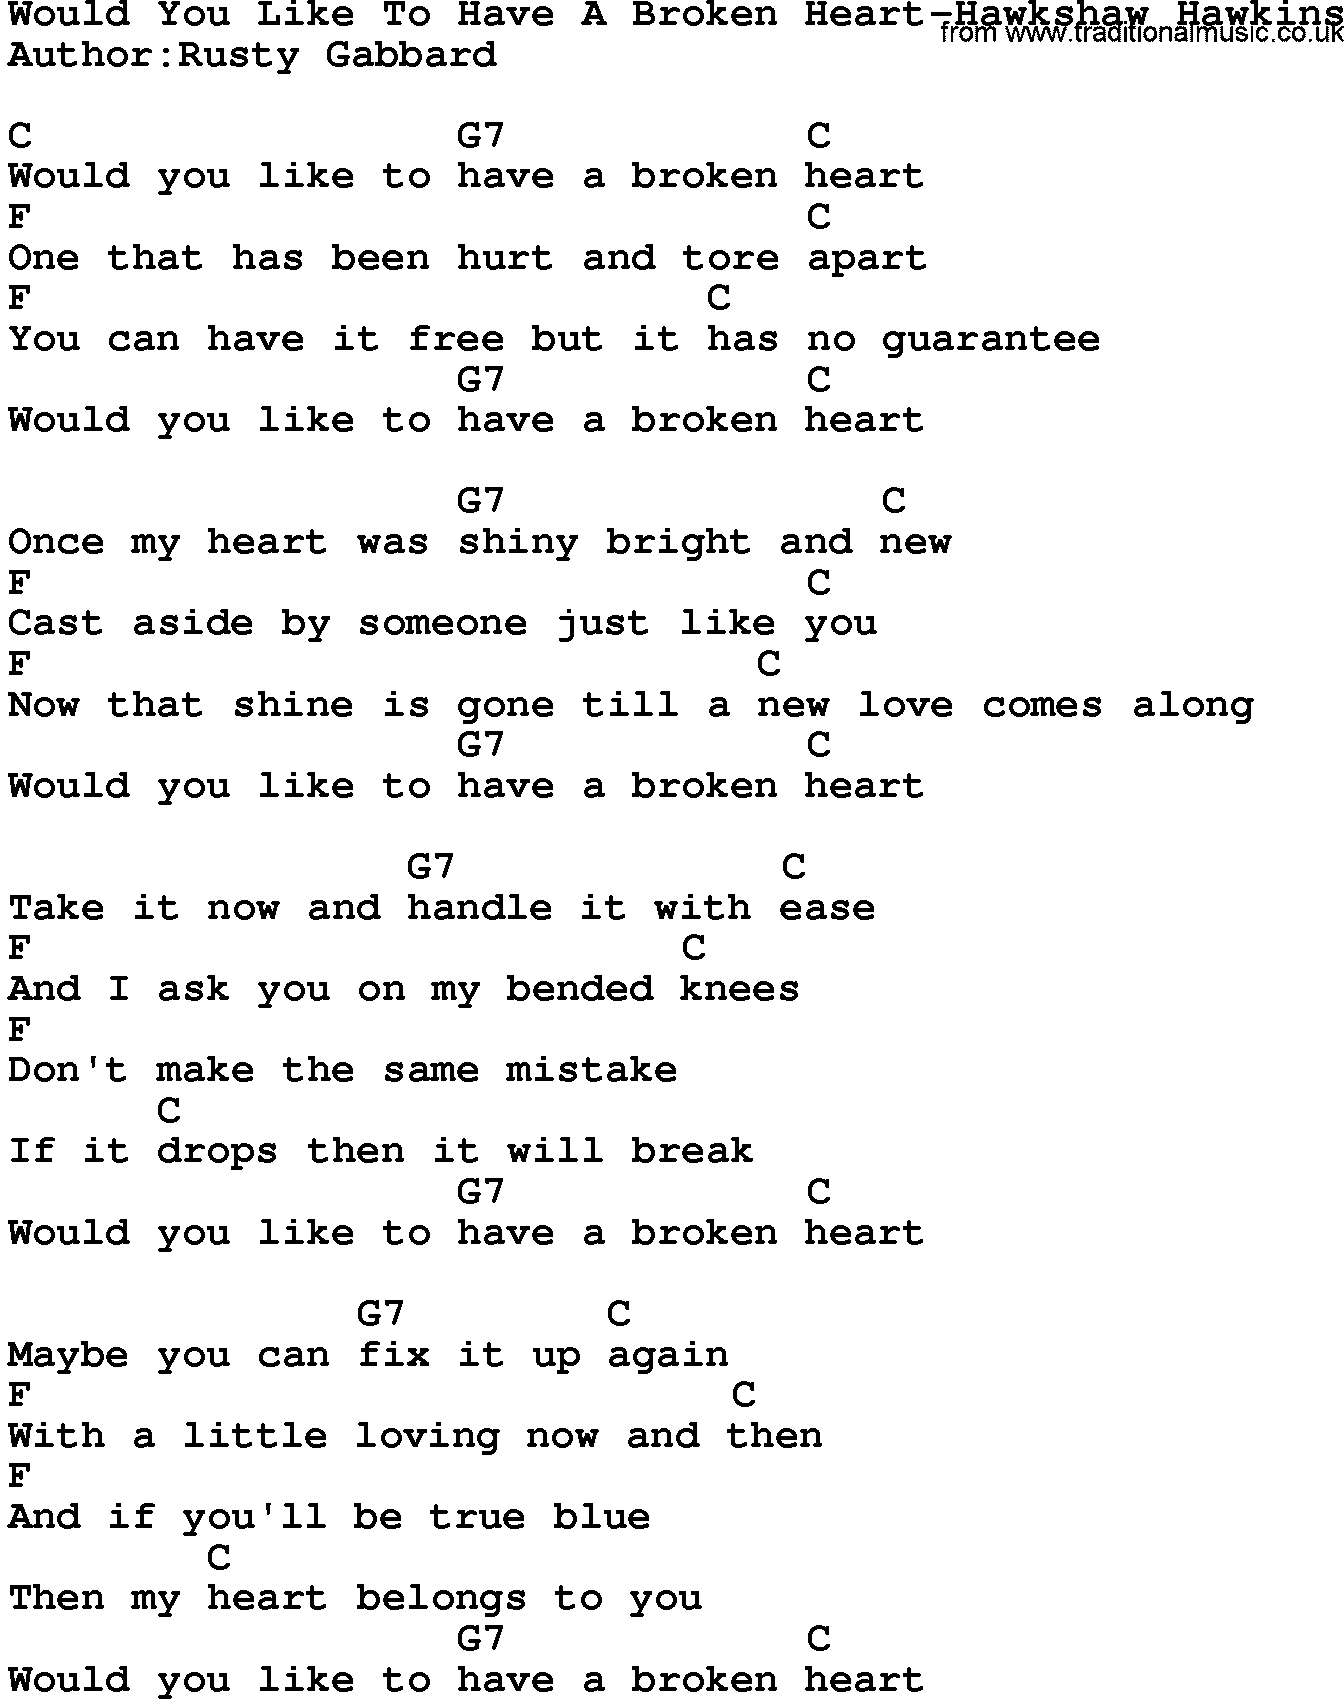 Country music song: Would You Like To Have A Broken Heart-Hawkshaw Hawkins lyrics and chords